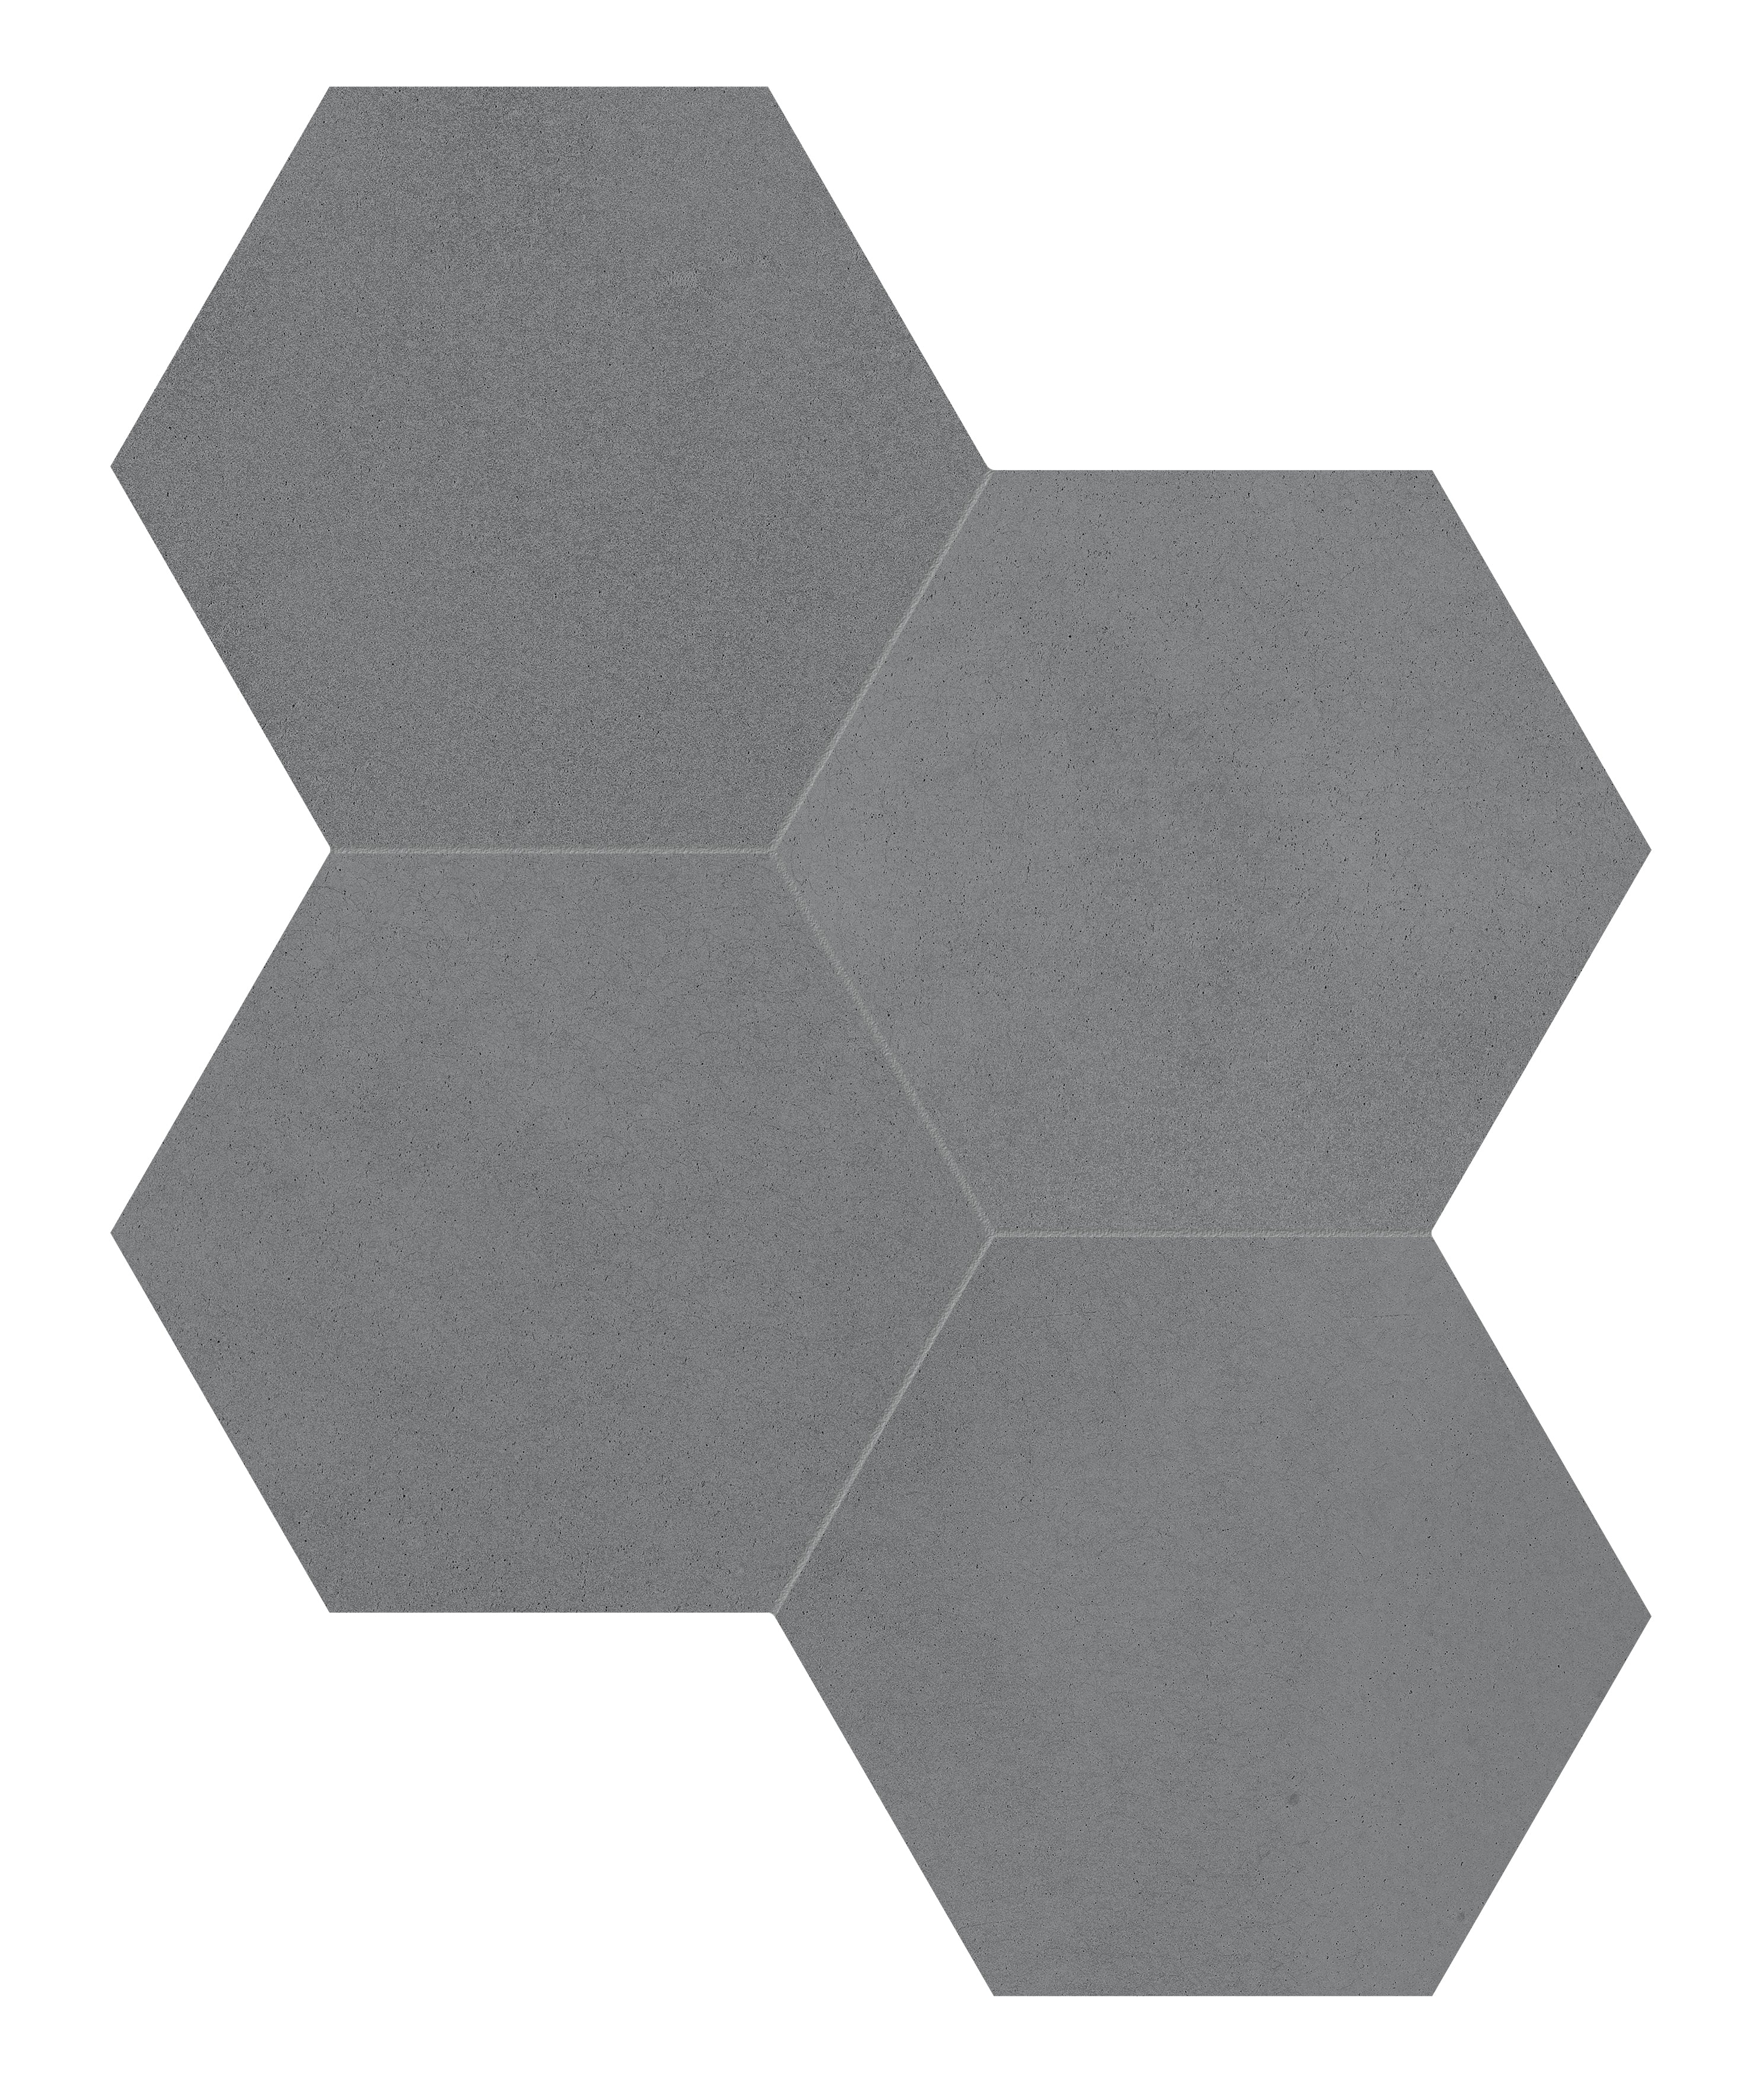 silk pattern glazed porcelain field tile from tapestri anatolia collection distributed by surface group international matte finish pressed edge 8&5 hexagon shape